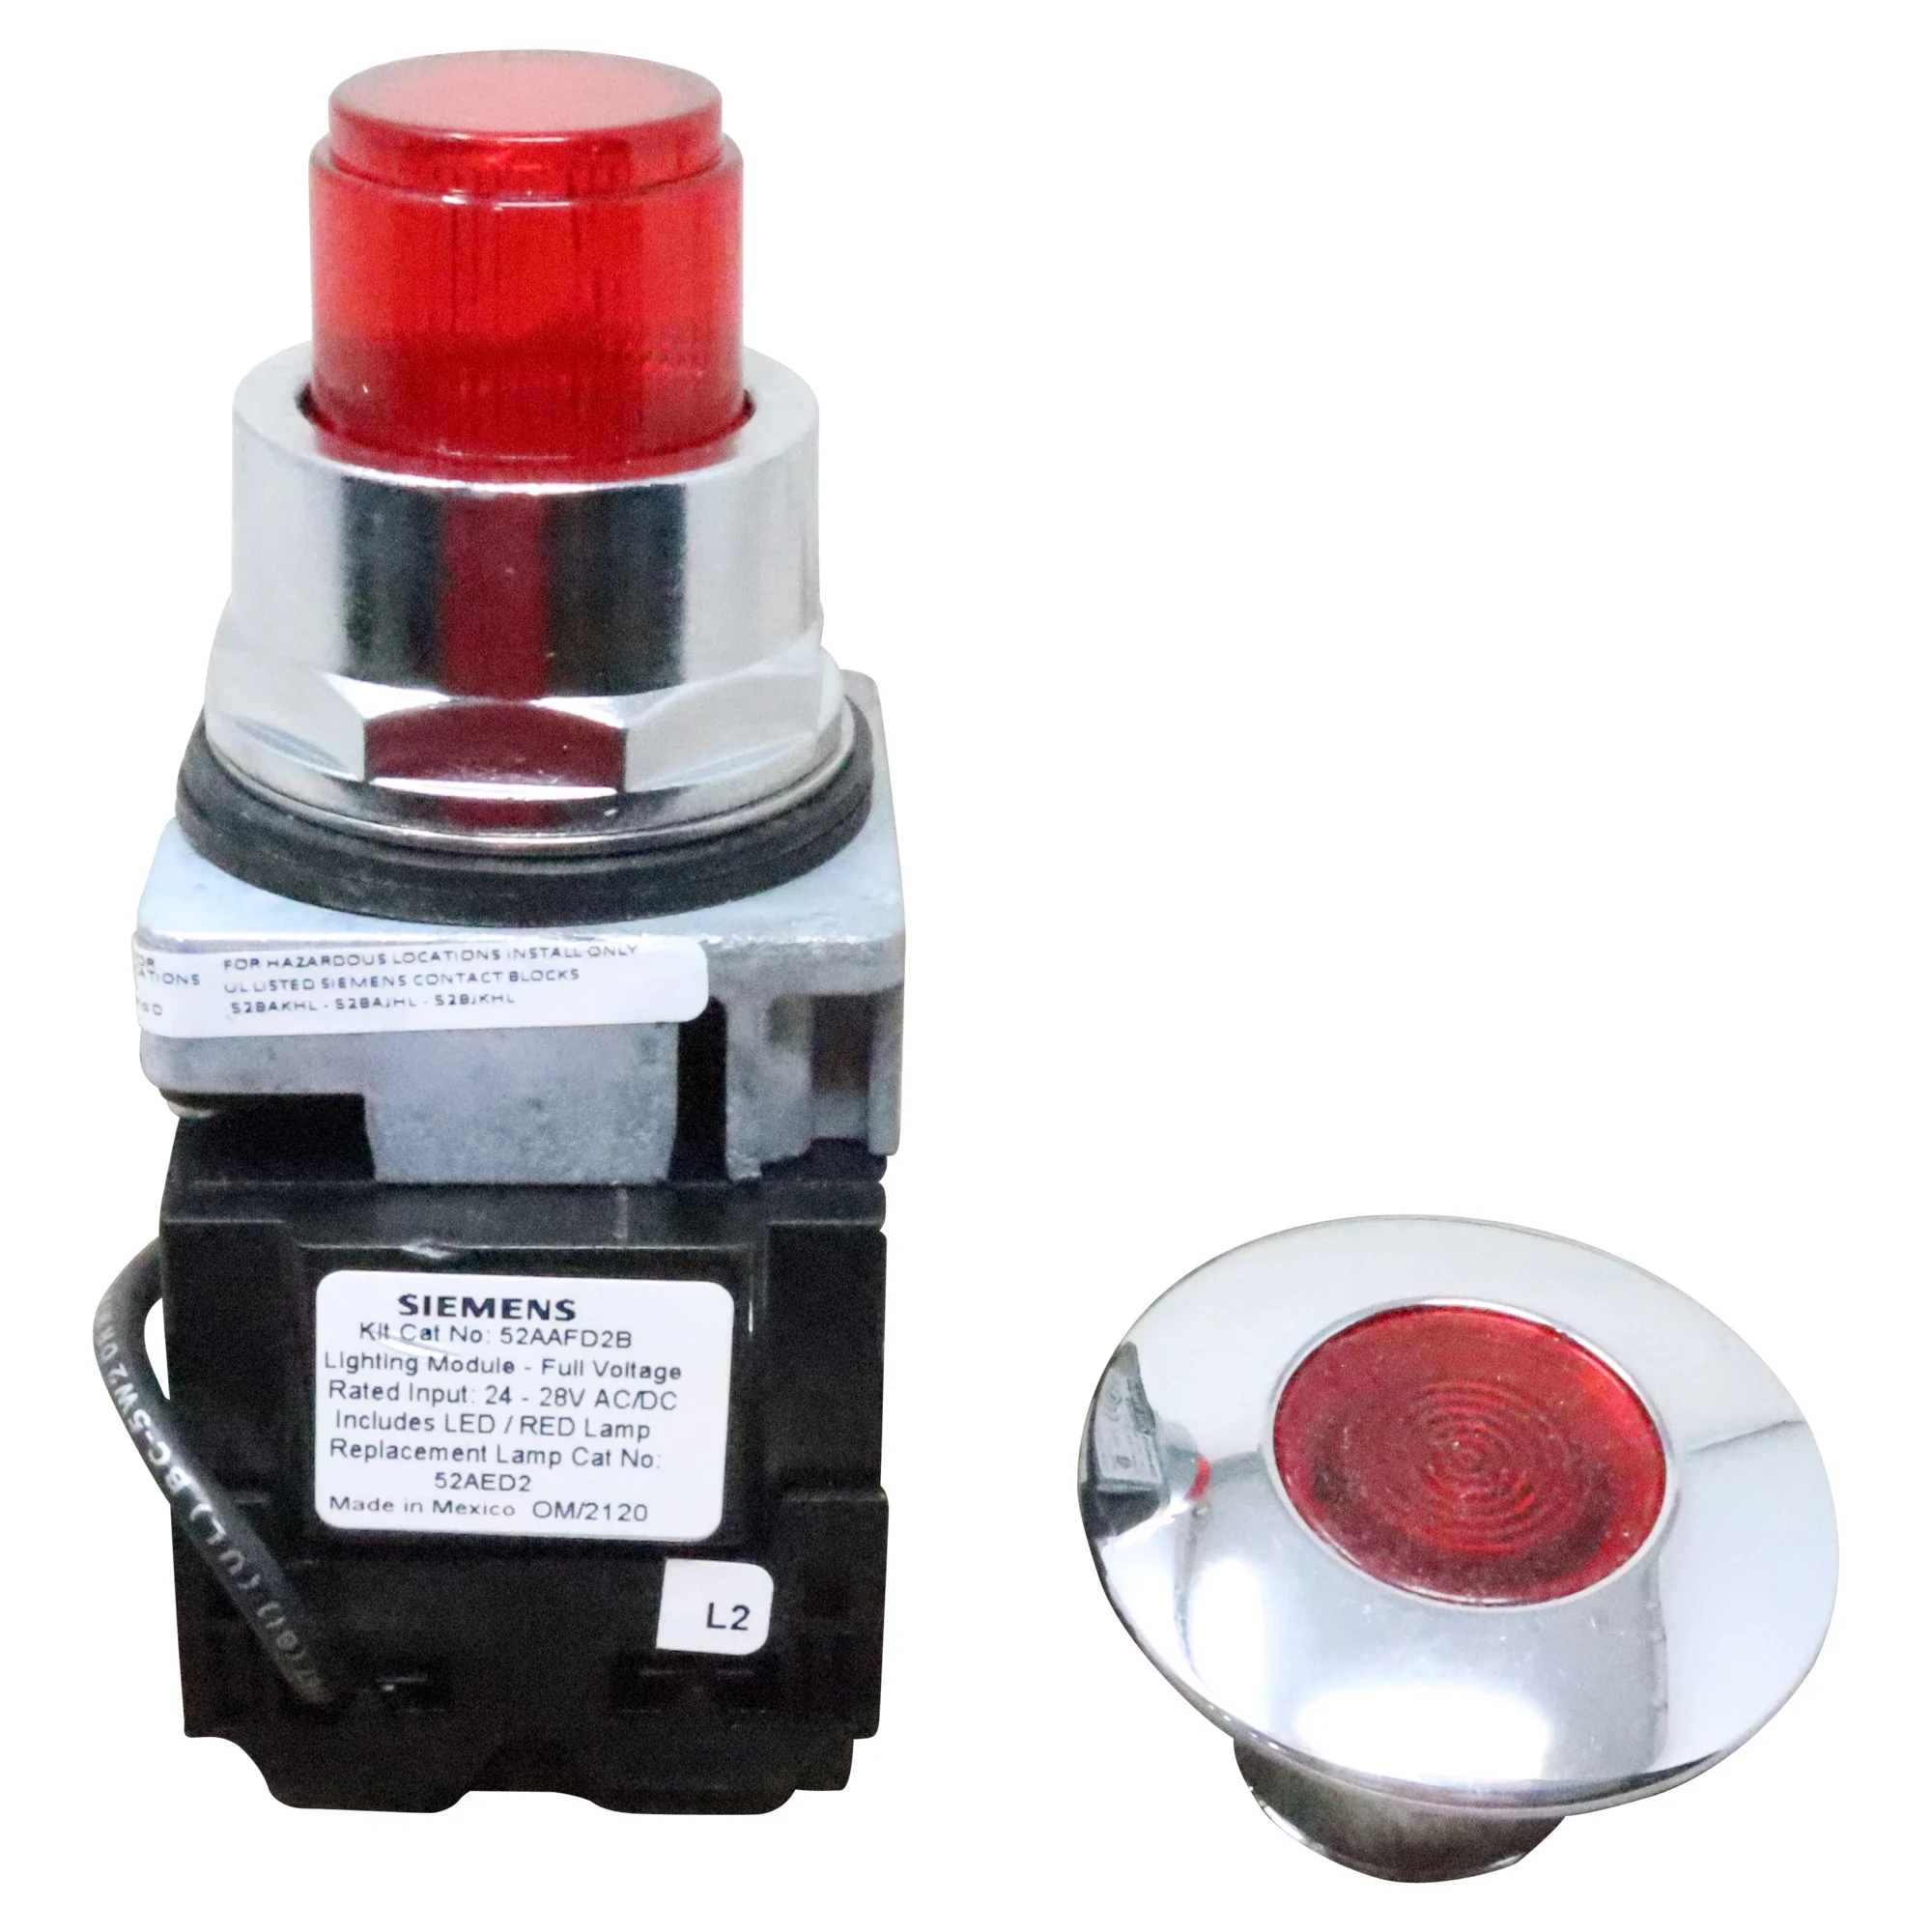 Galbreath™ Electric Stop Button Momentary Red